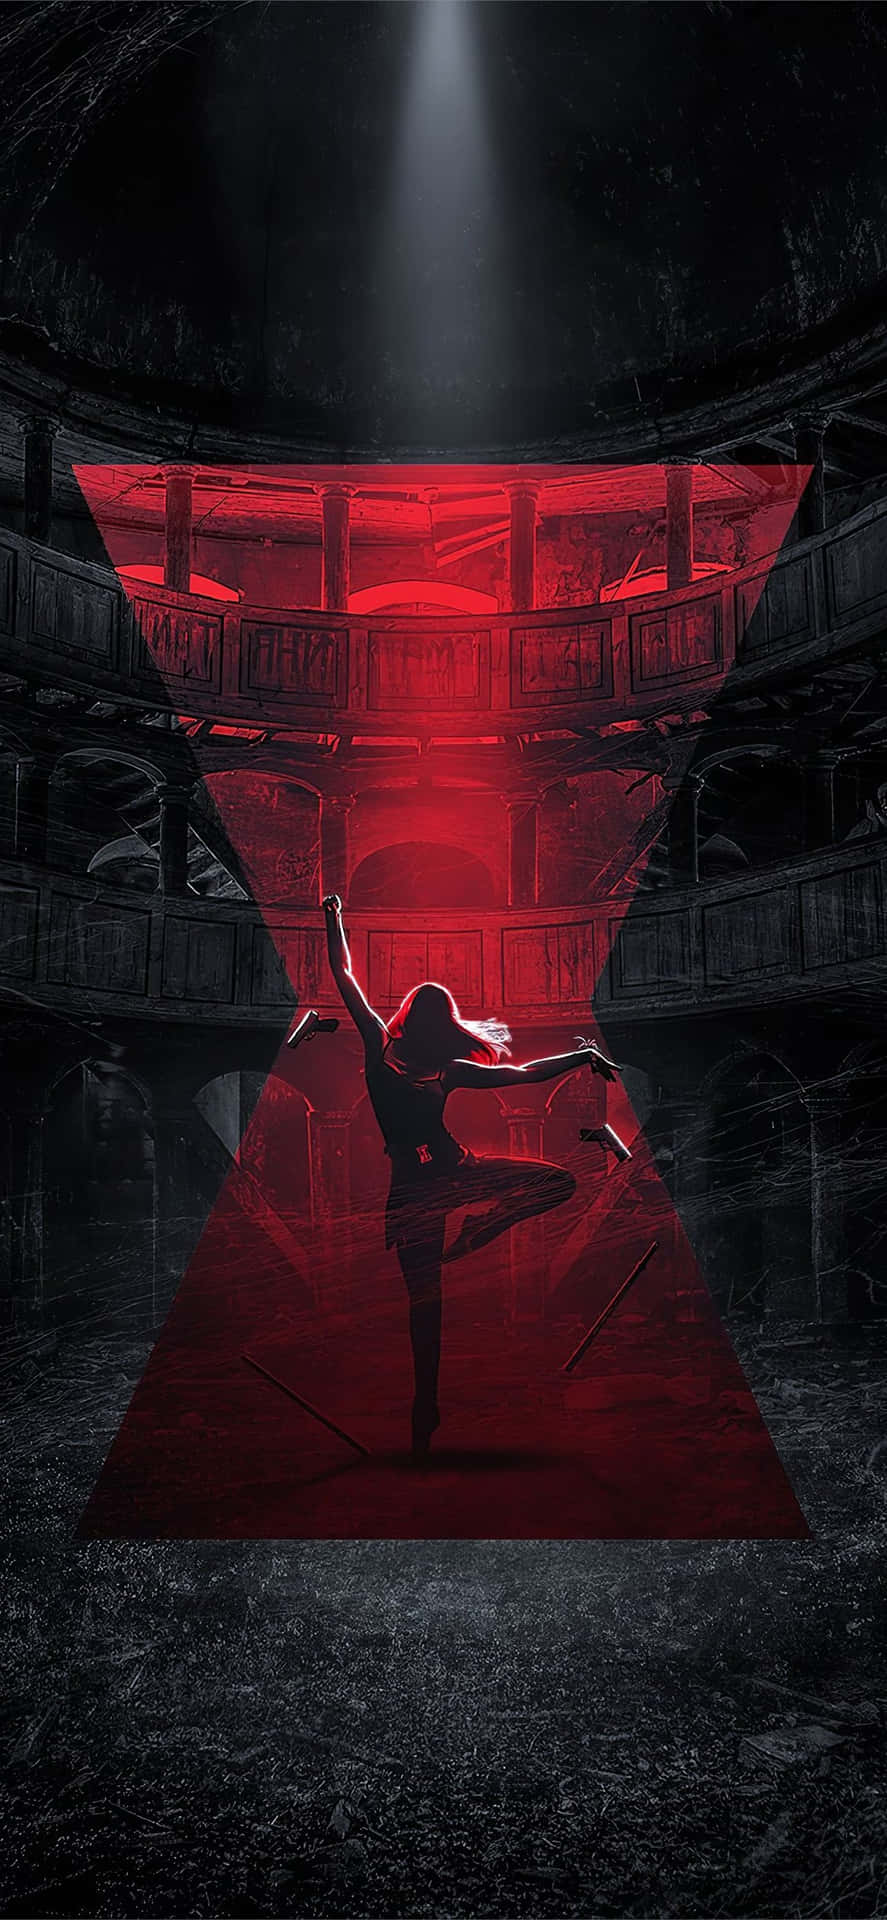 The Poster For The Ballet X Wallpaper